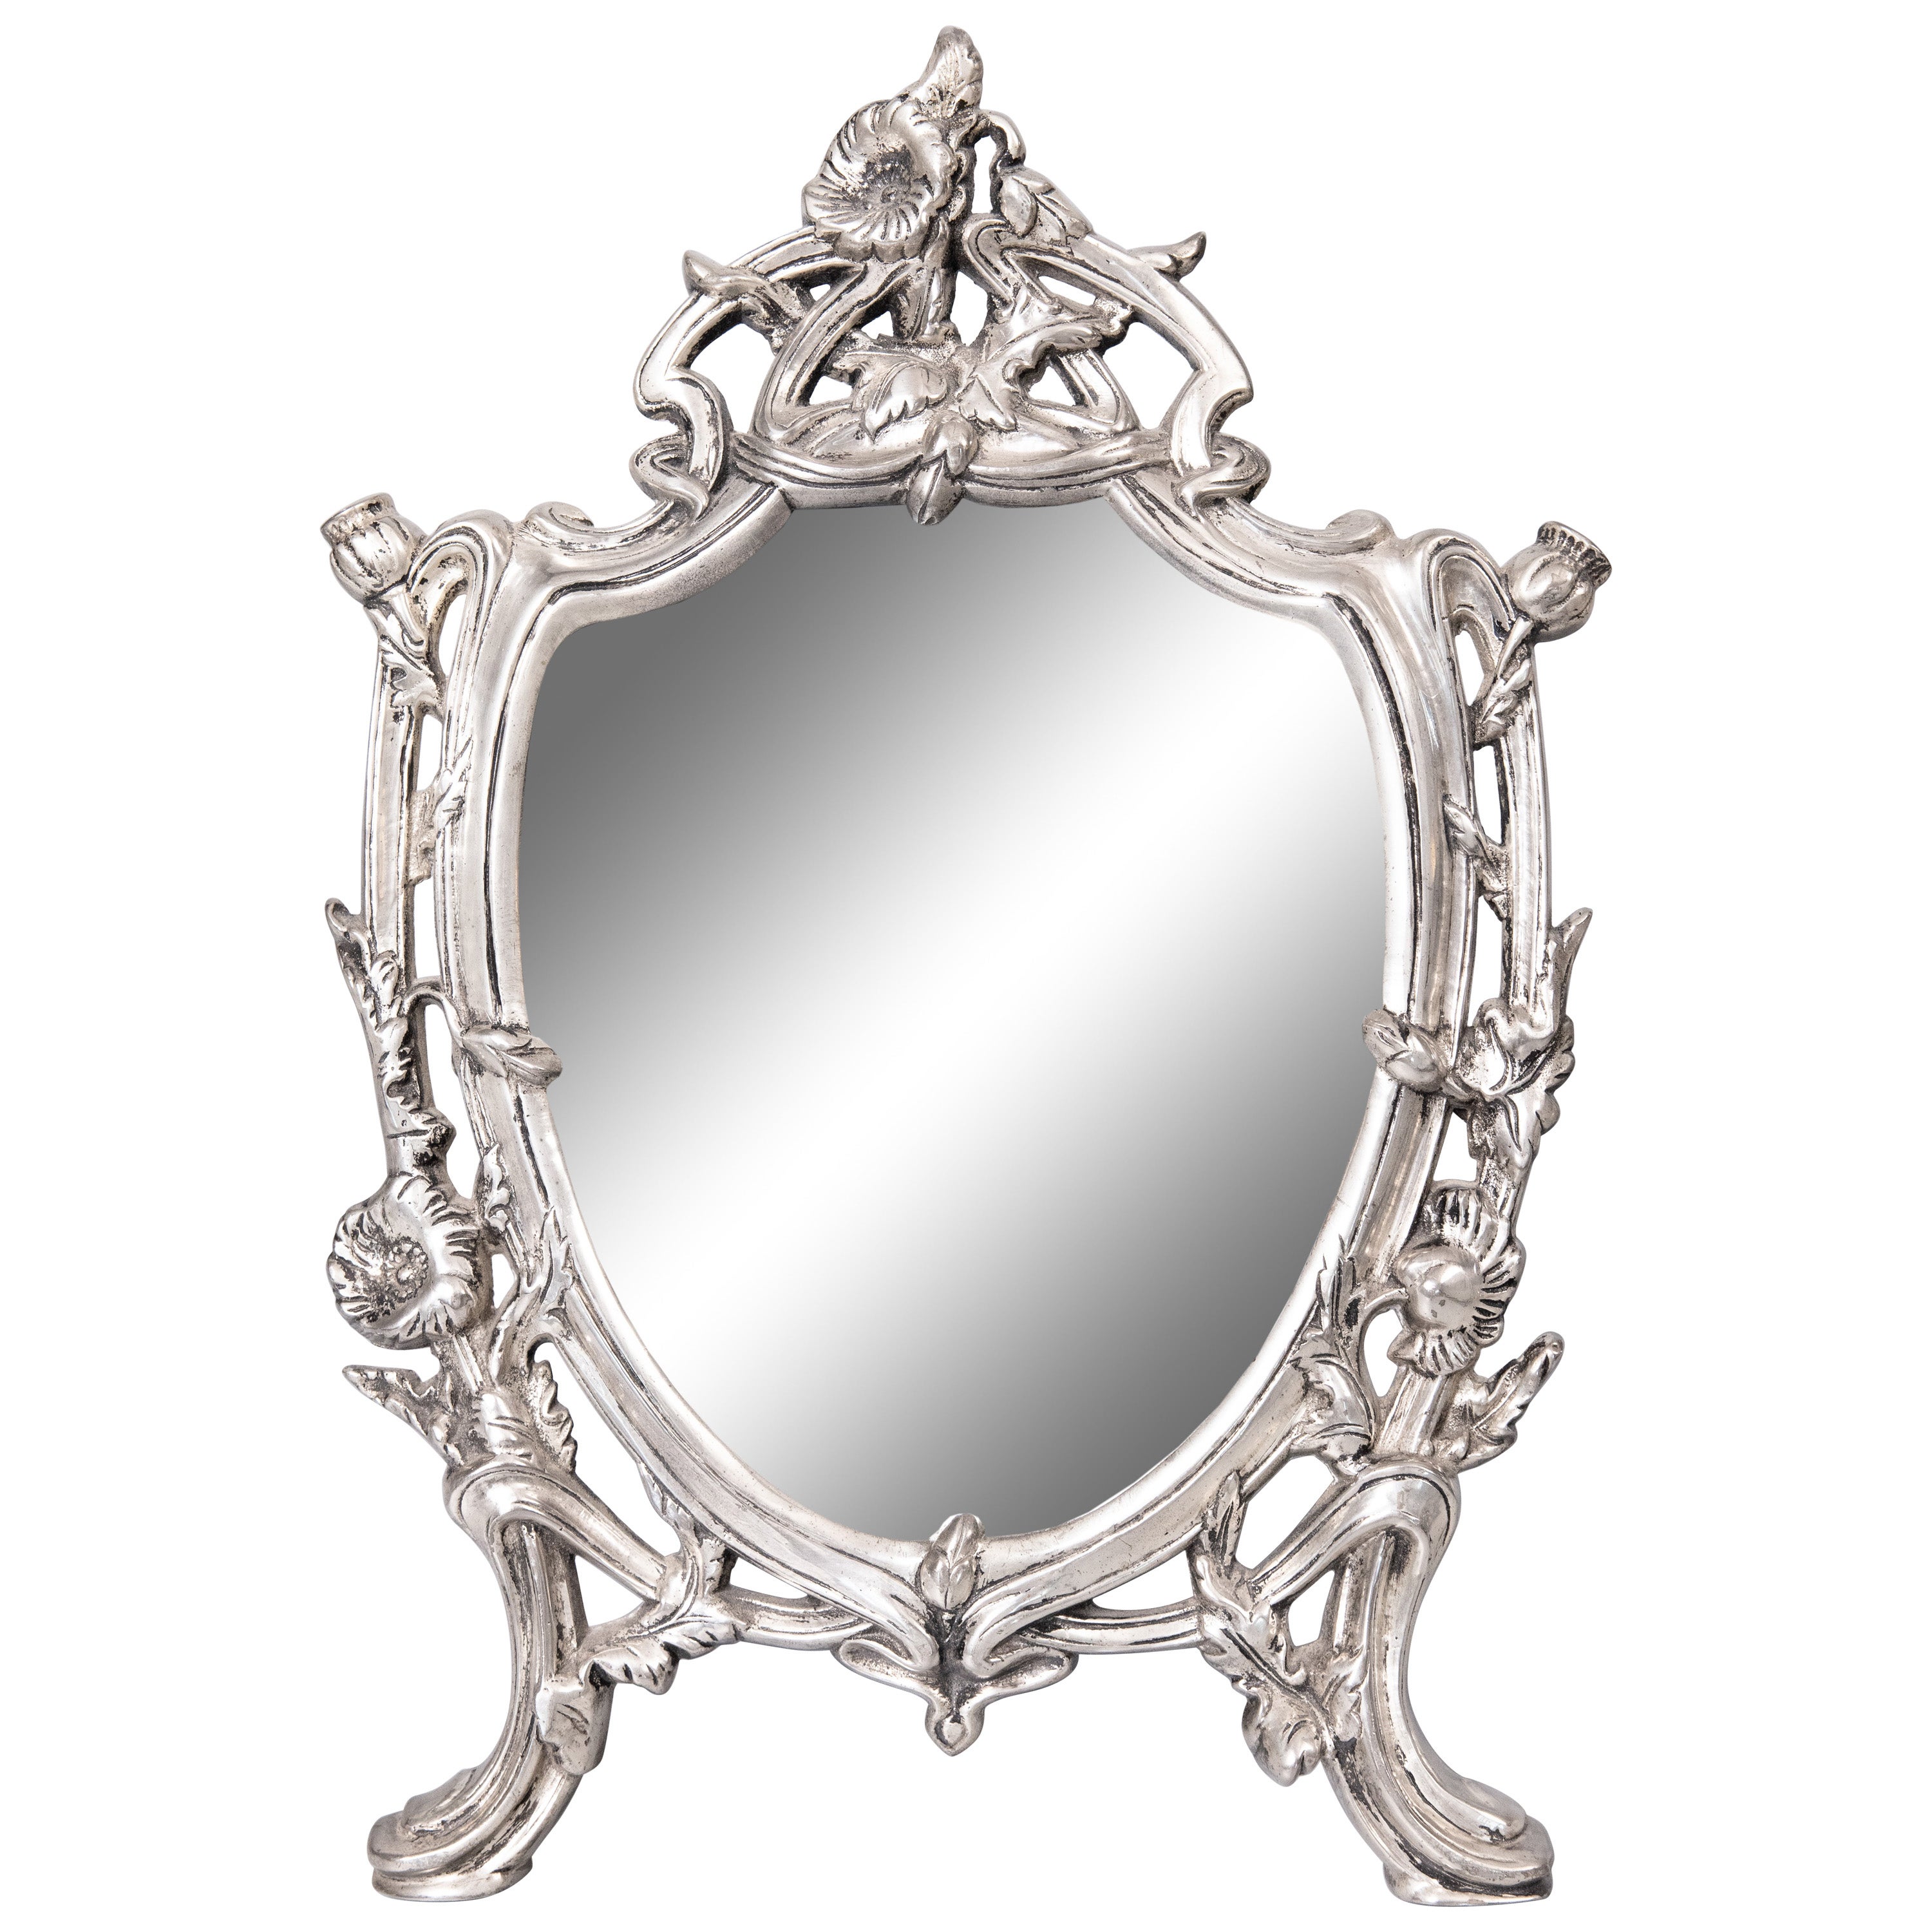 French Art Nouveau Silver Plate Dresser Vanity Table Easel Back Mirror, c. 1900